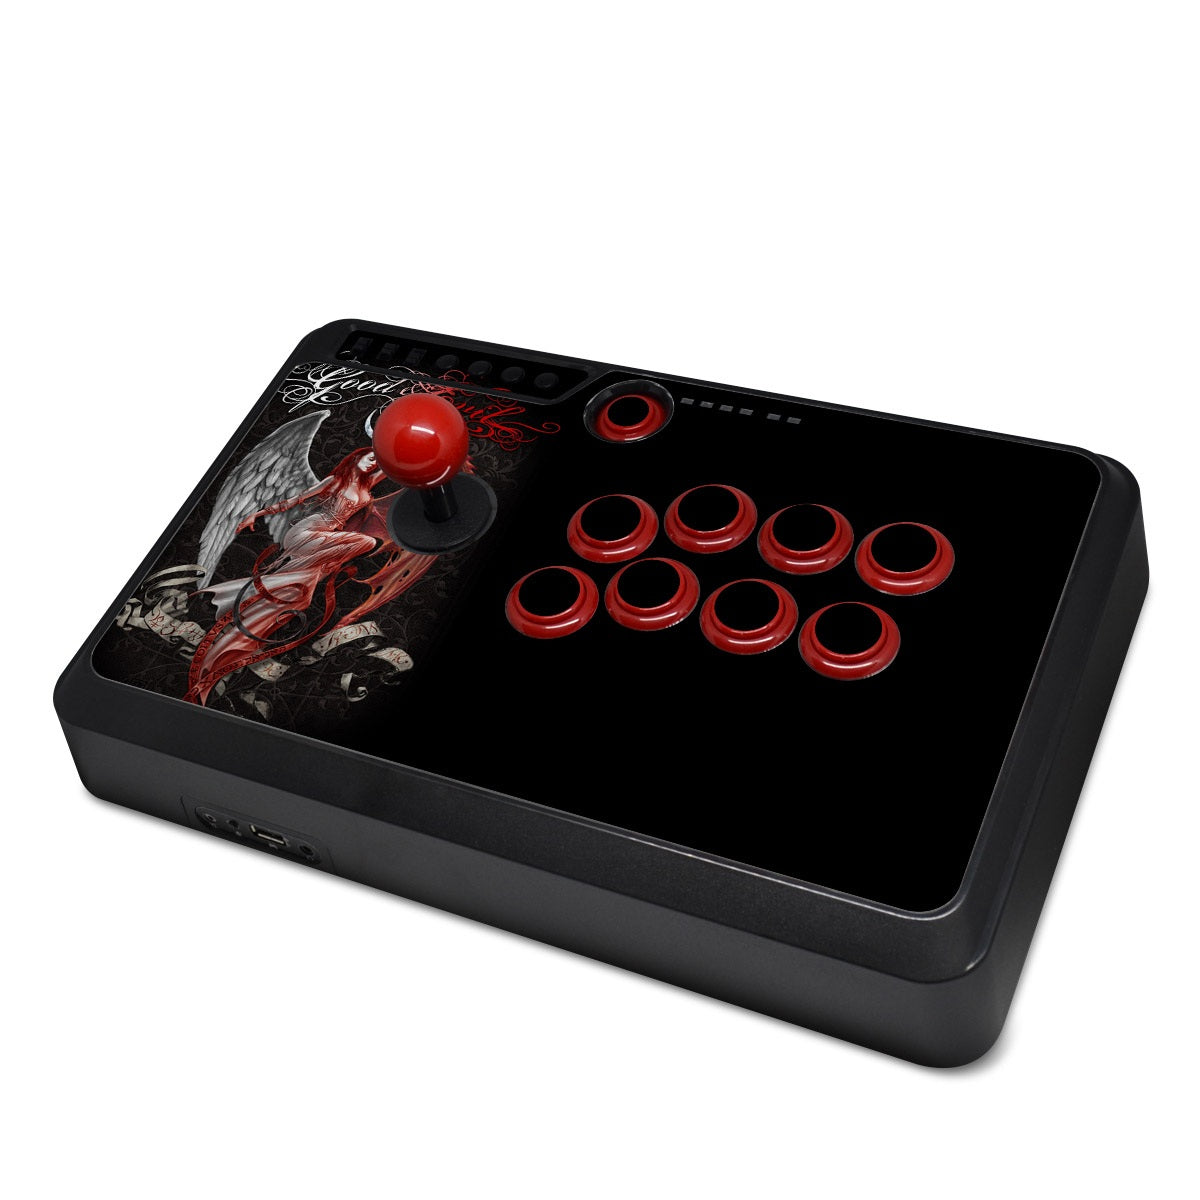 Good and Evil - Mayflash F500 Arcade Fightstick Skin